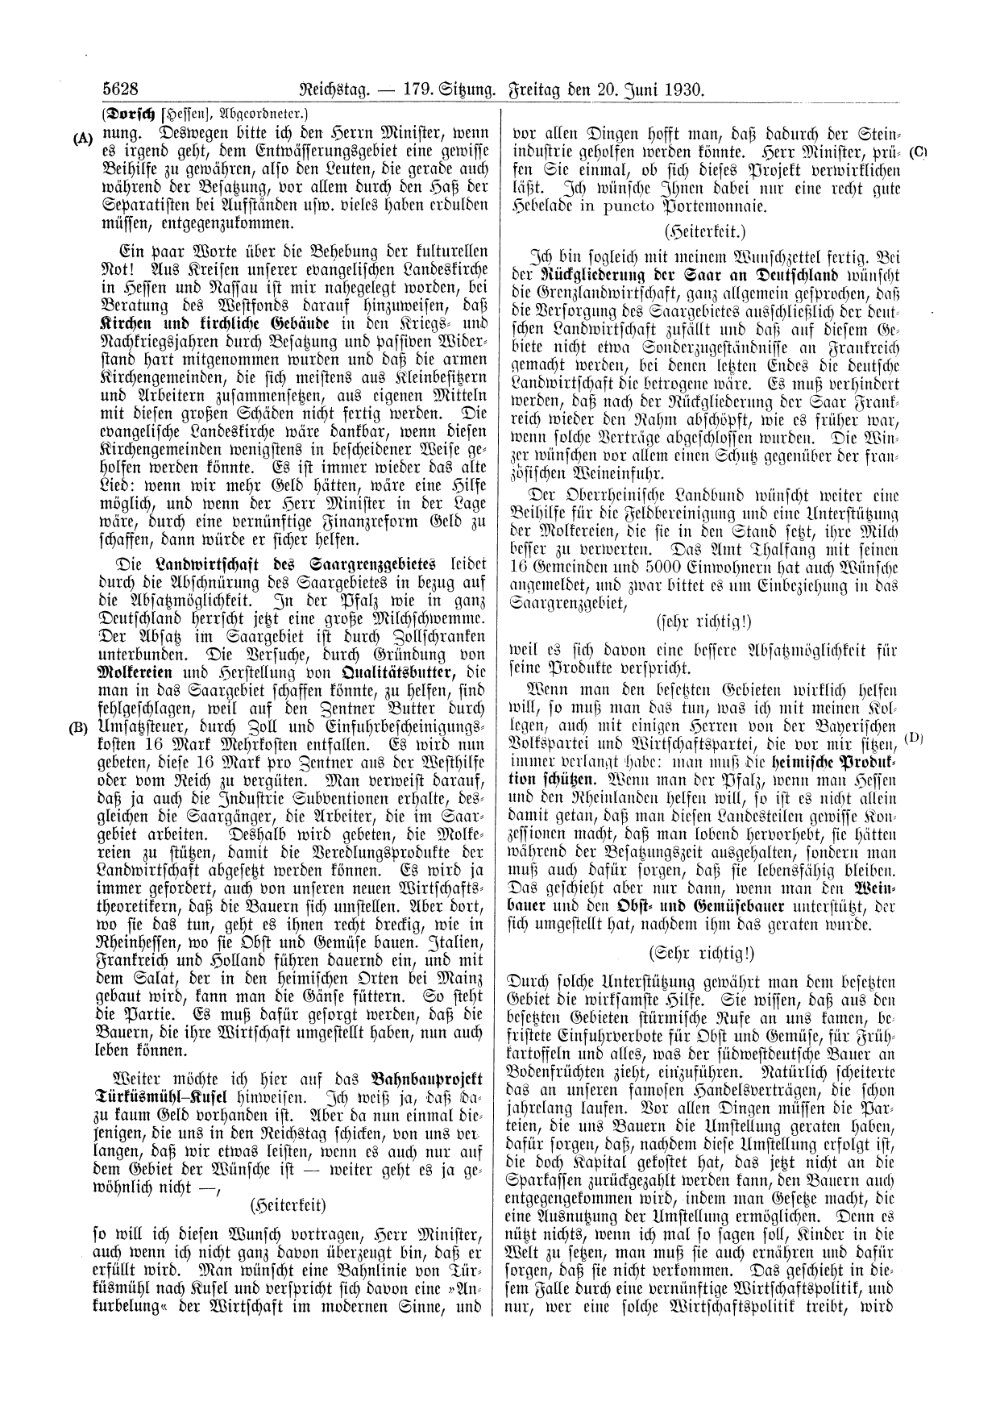 Scan of page 5628